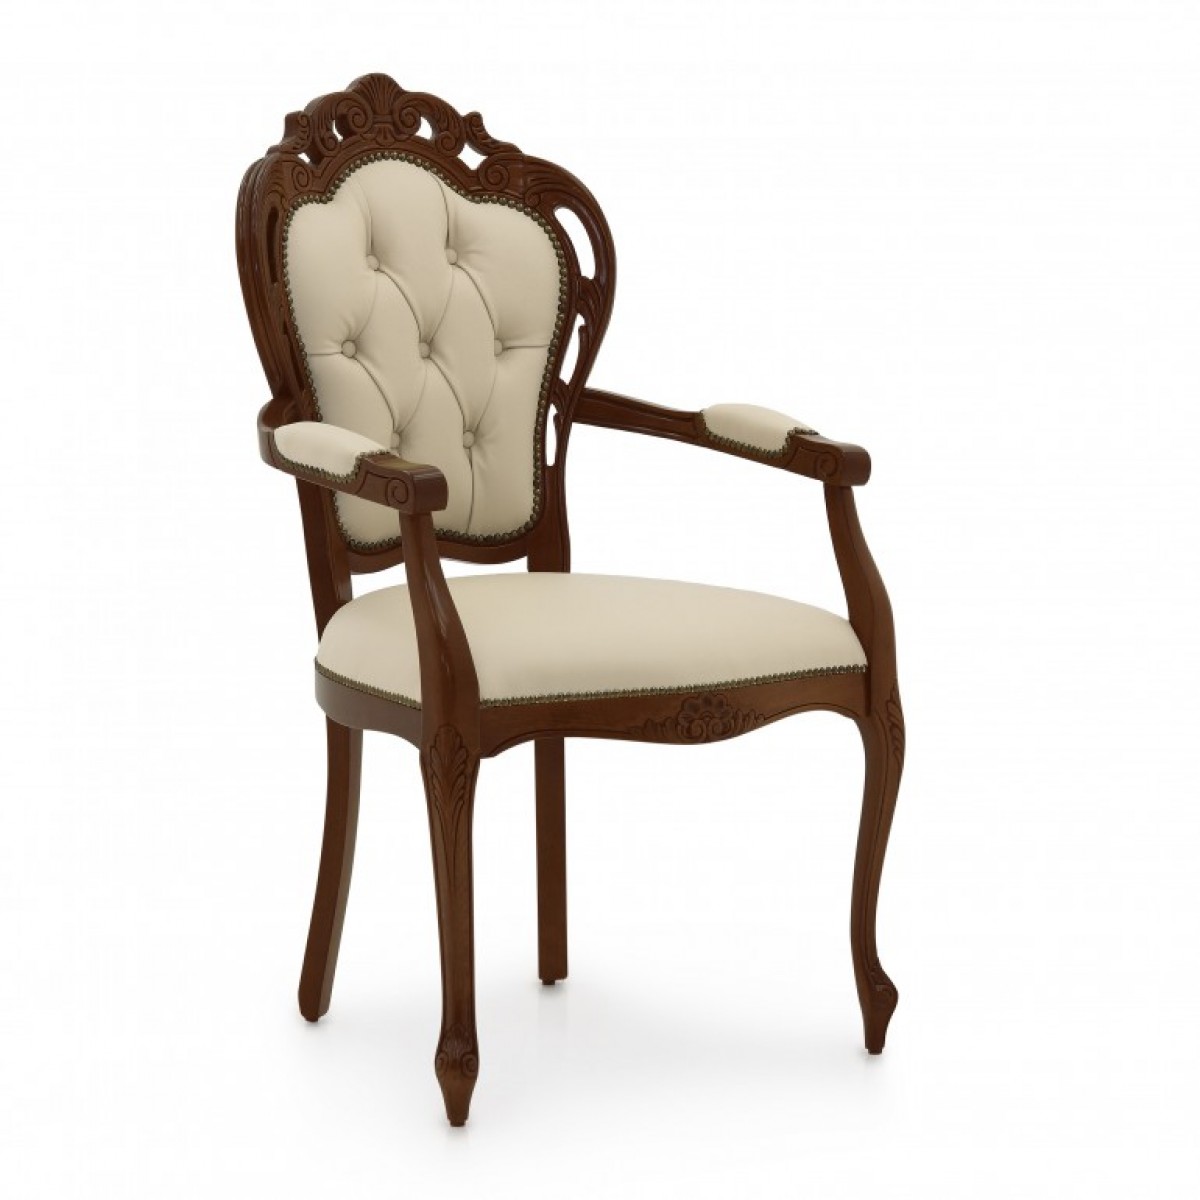 Classic armchair in baroque style with wooden frame TRAFORATA by Sevensedie